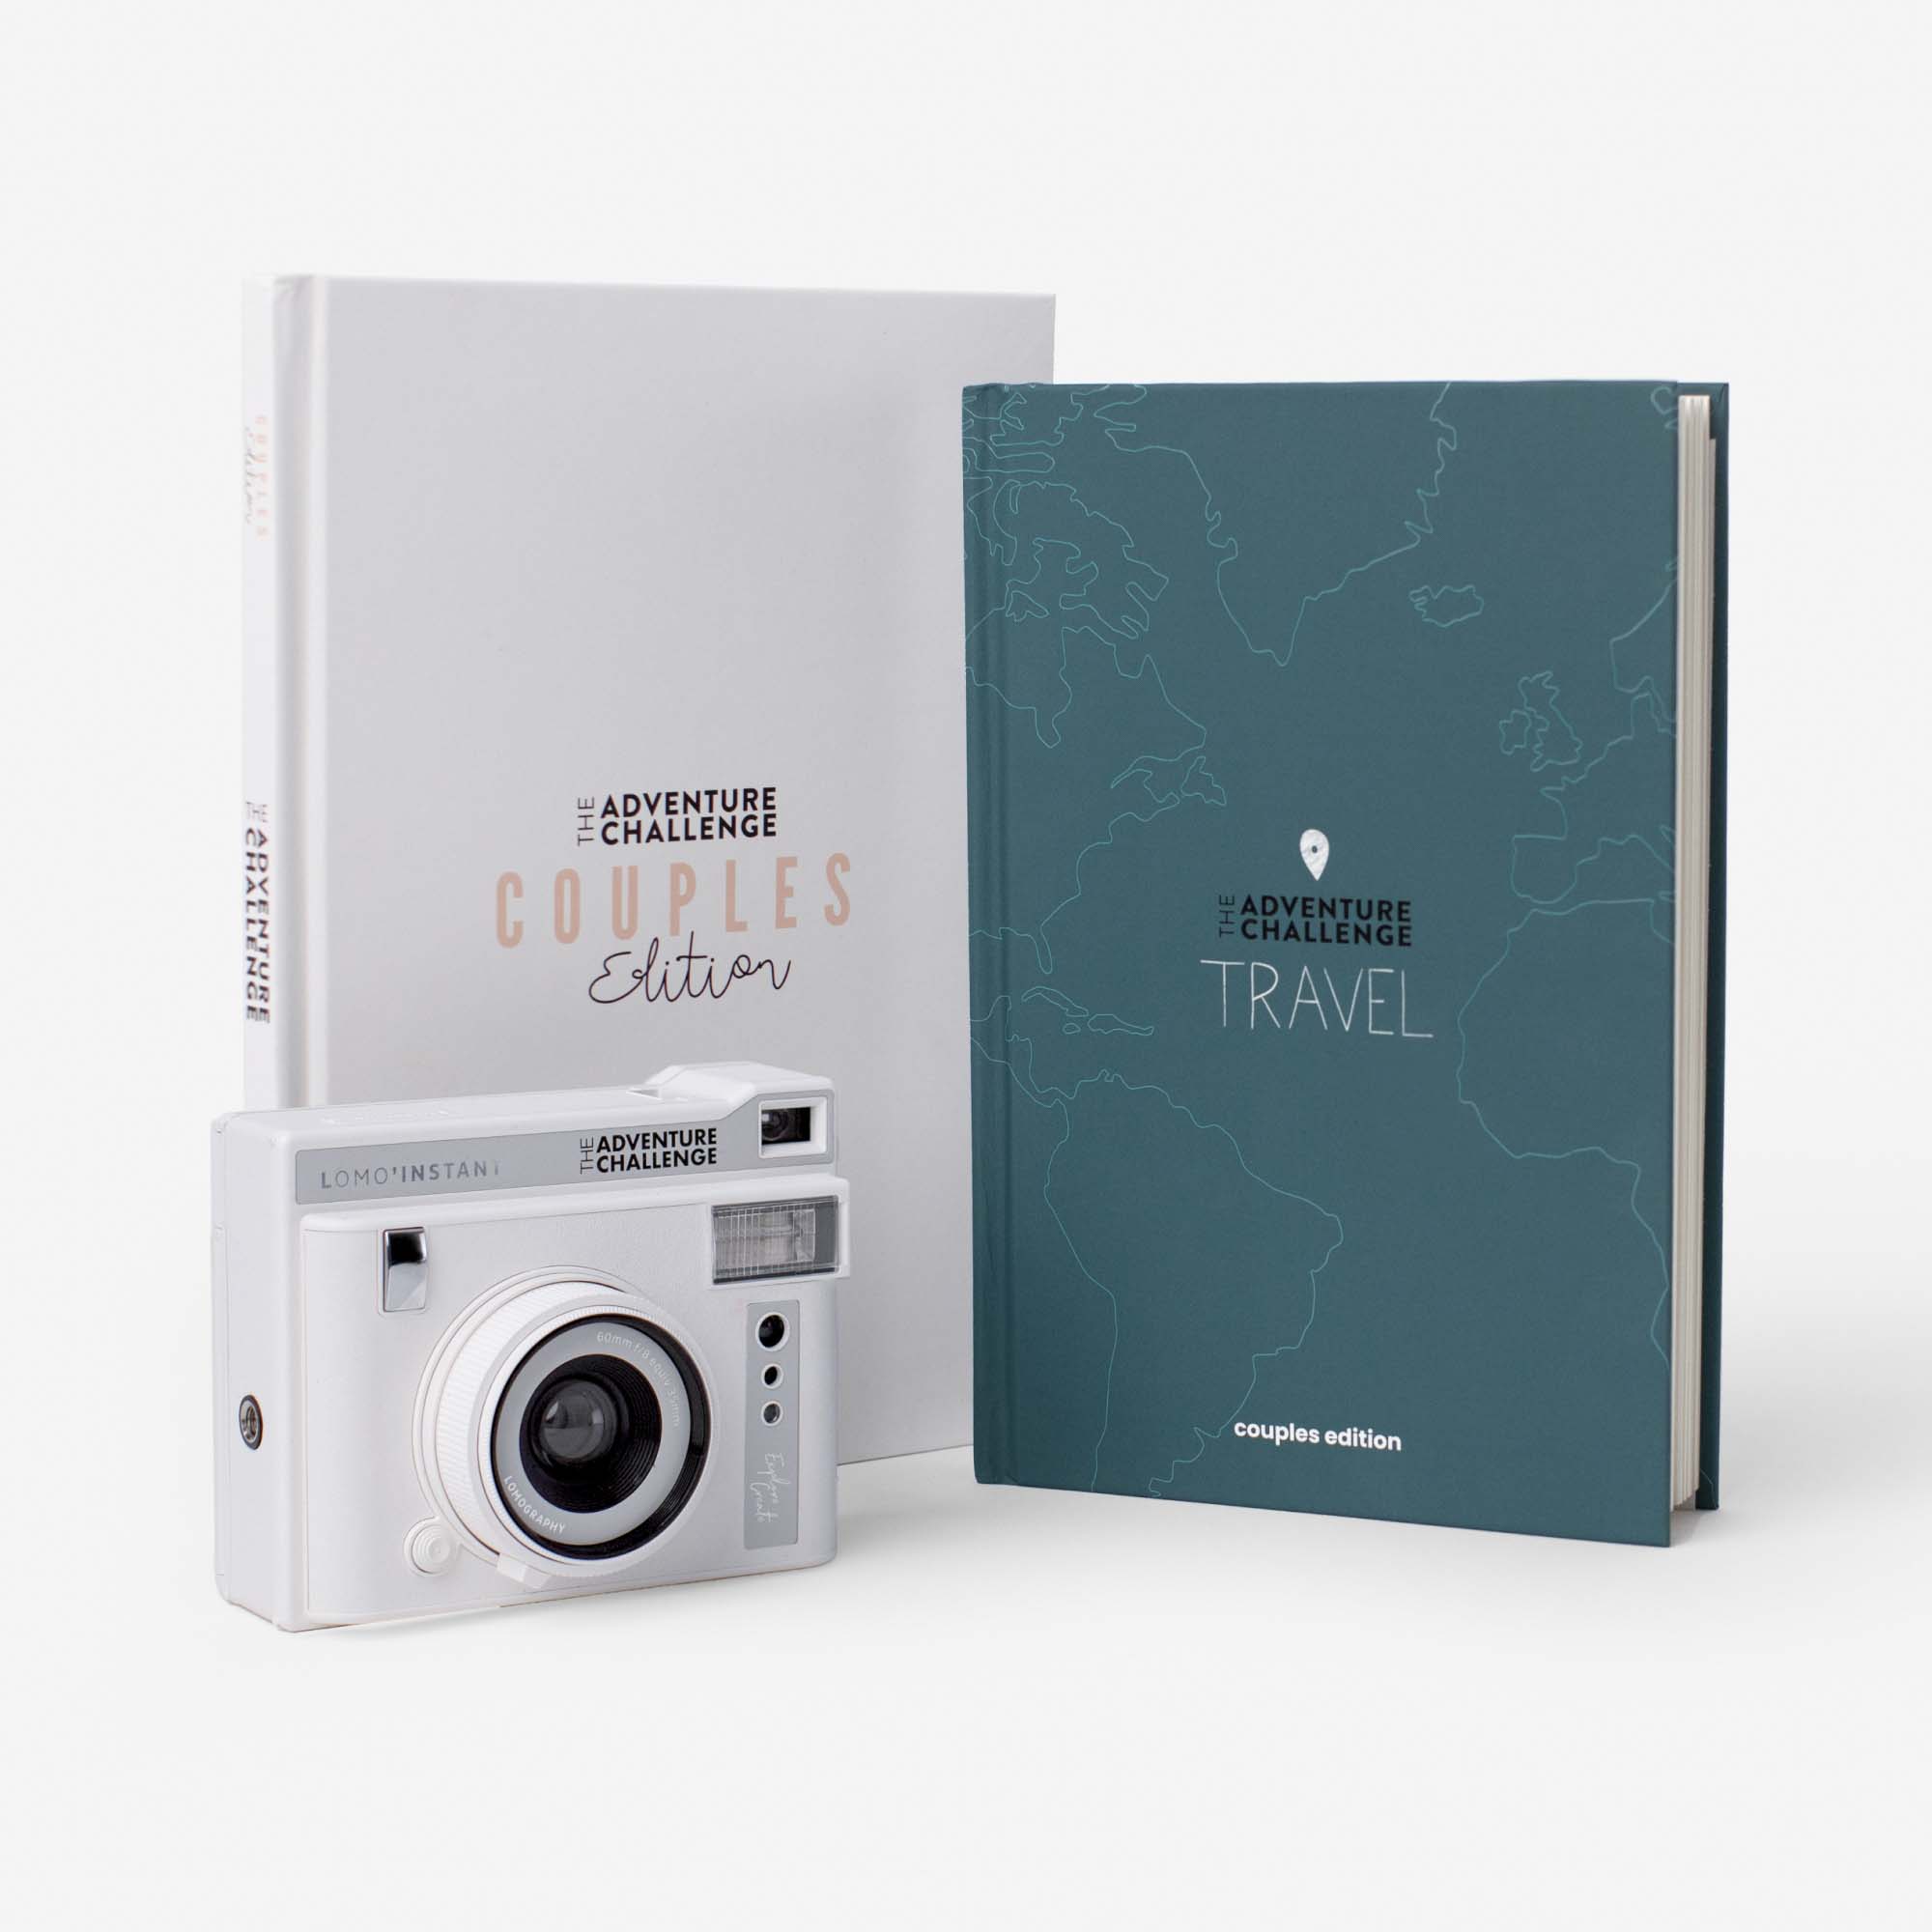 Travel and Couples Camera Bundle